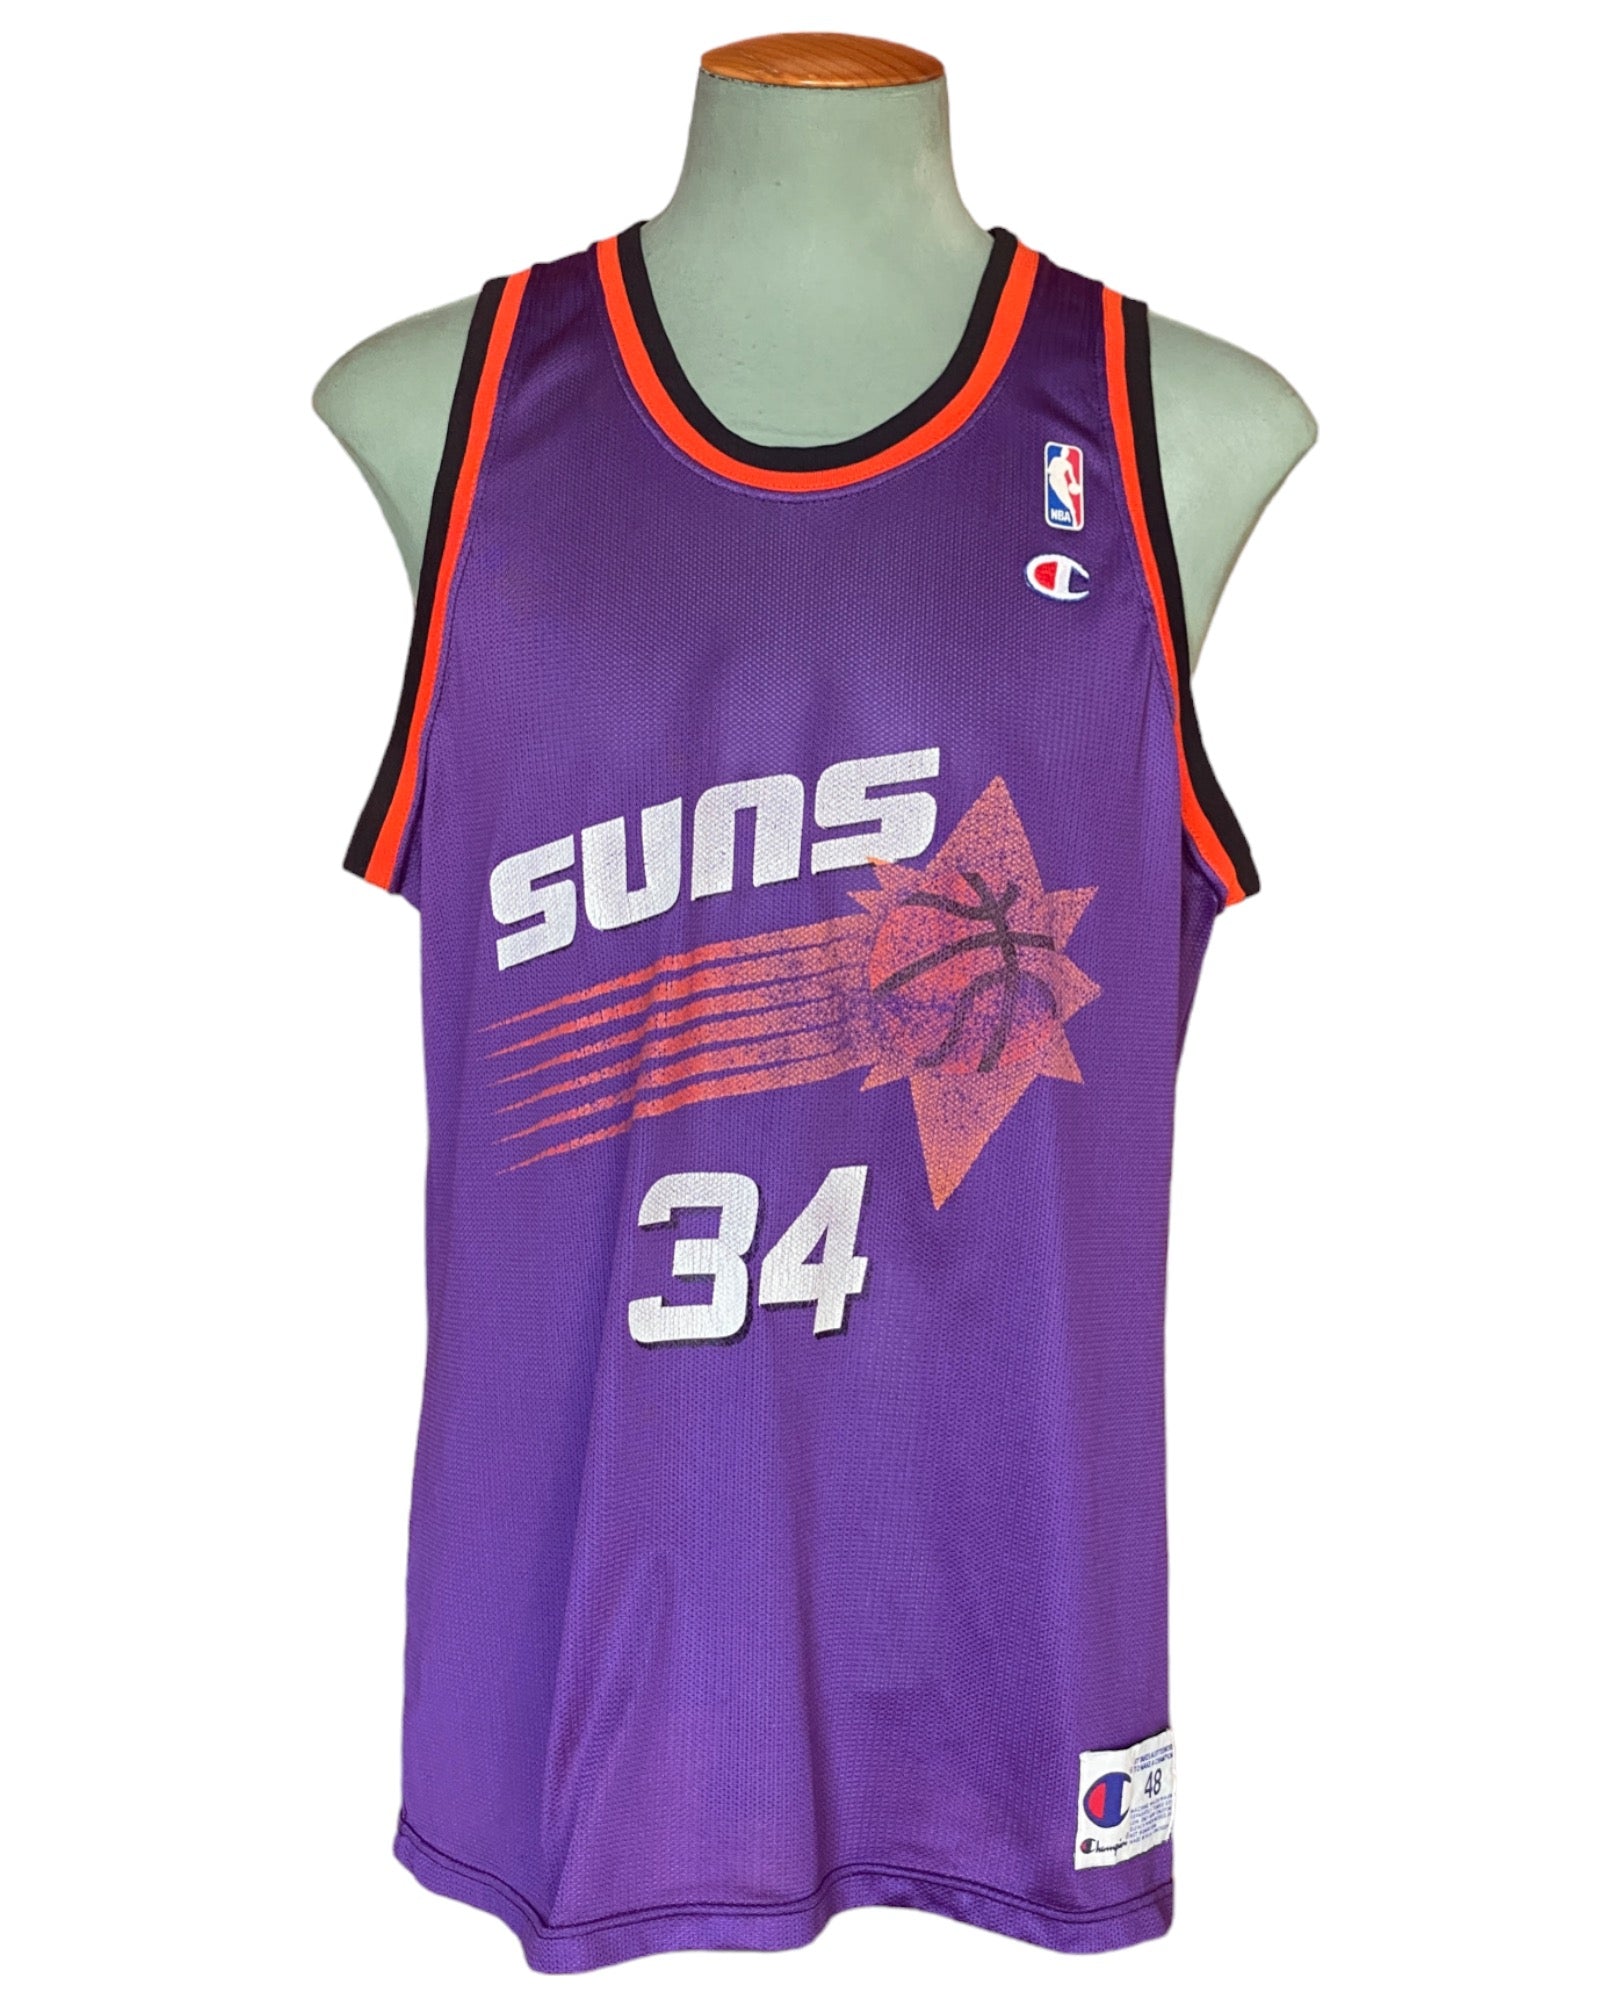 Vintage Suns NBA Jersey #34 Barker - Size 48 | Made In USA by Champion